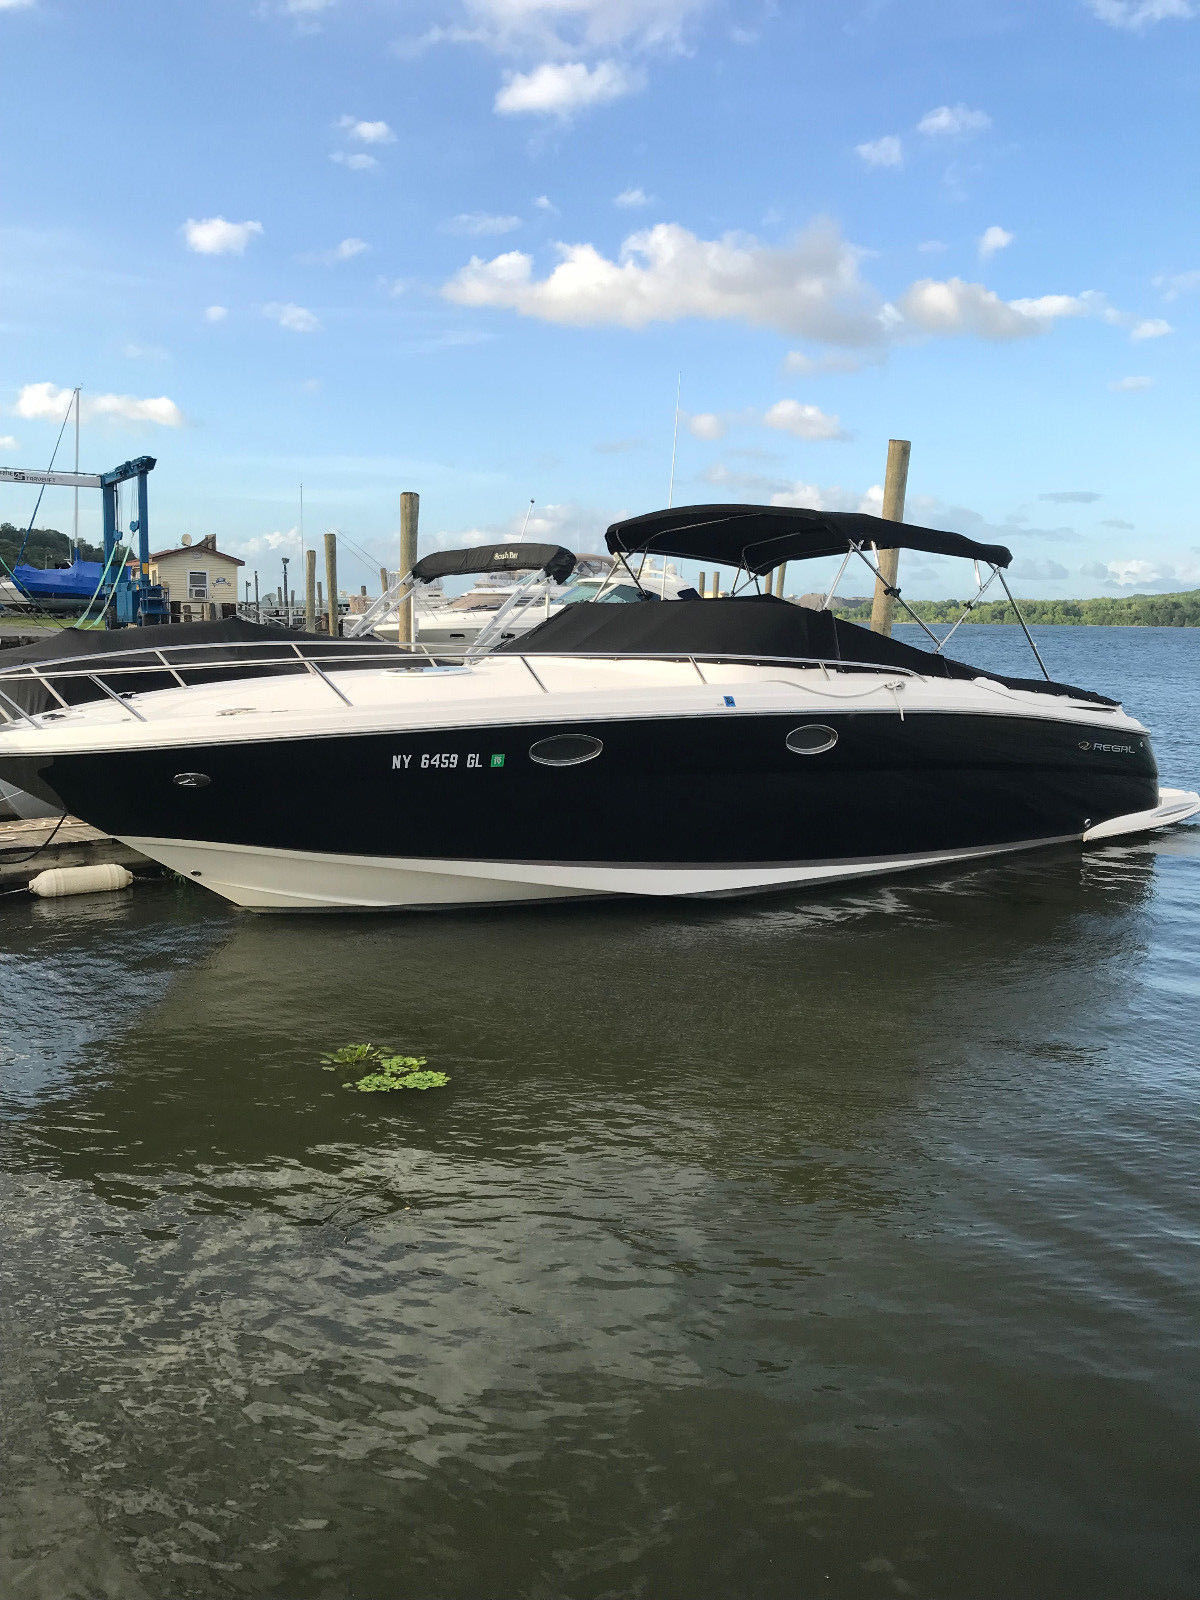 Regal 2004 for sale for $49,995 - Boats-from-USA.com